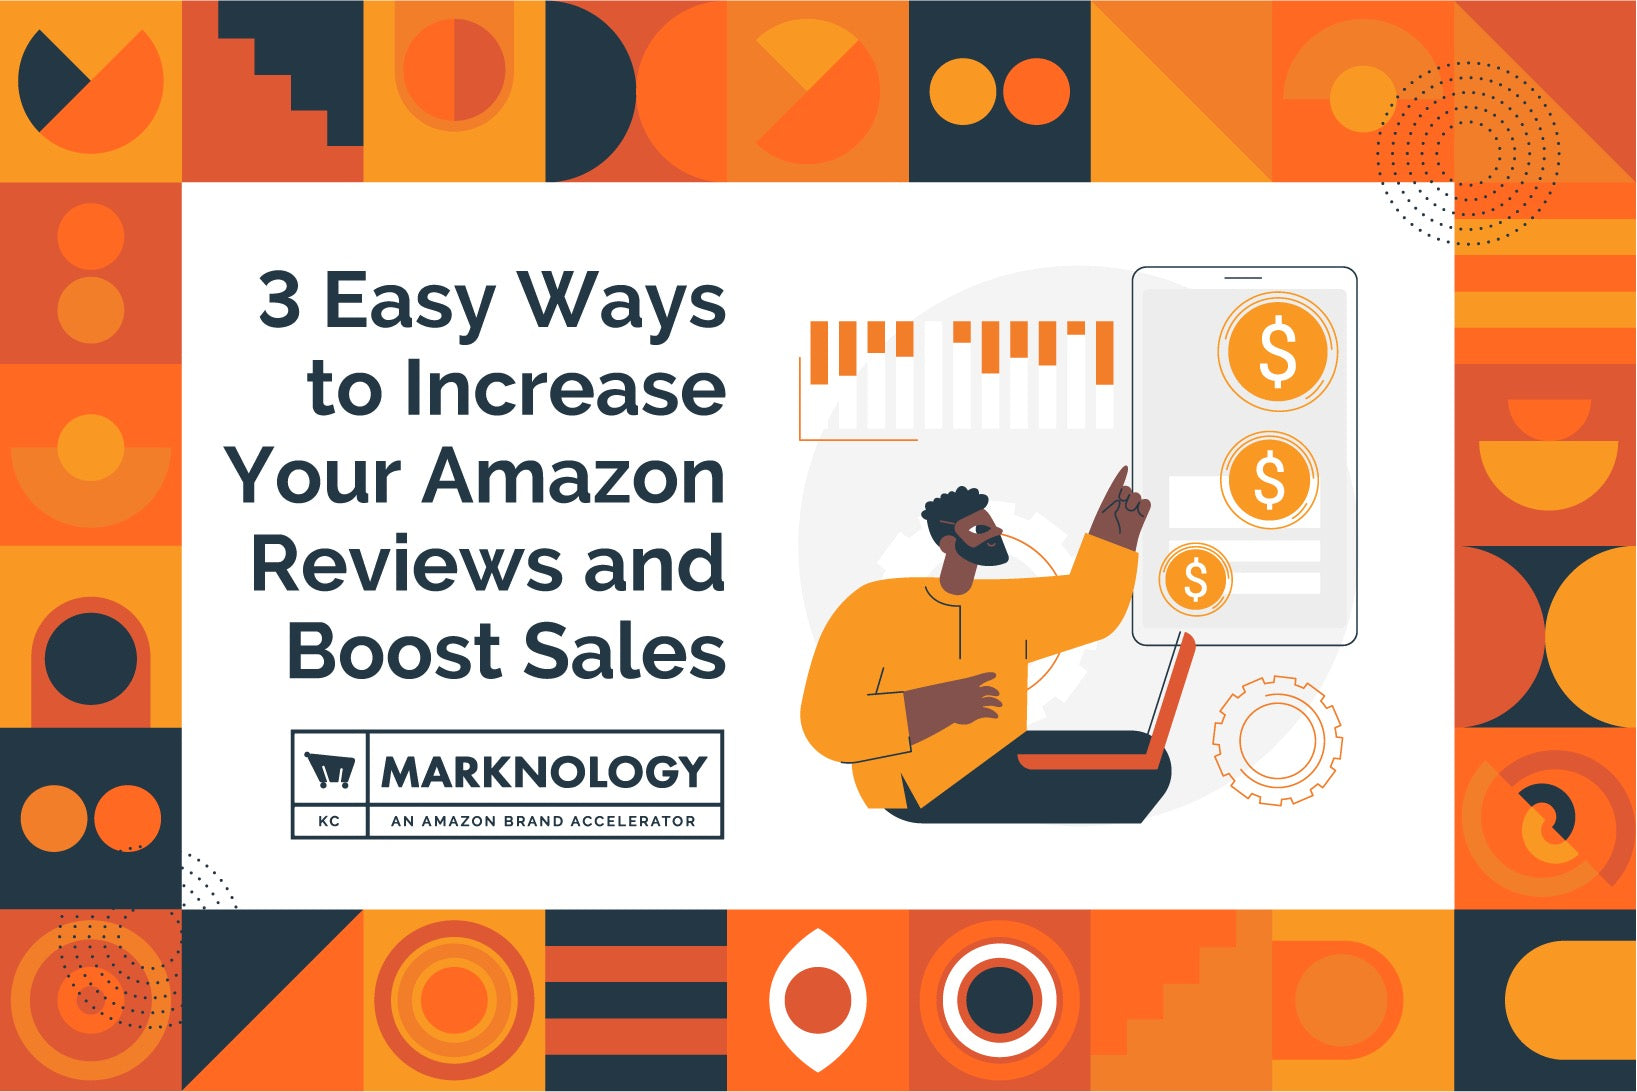 3 Easy Ways to Increase Your Amazon Reviews and Boost Sales